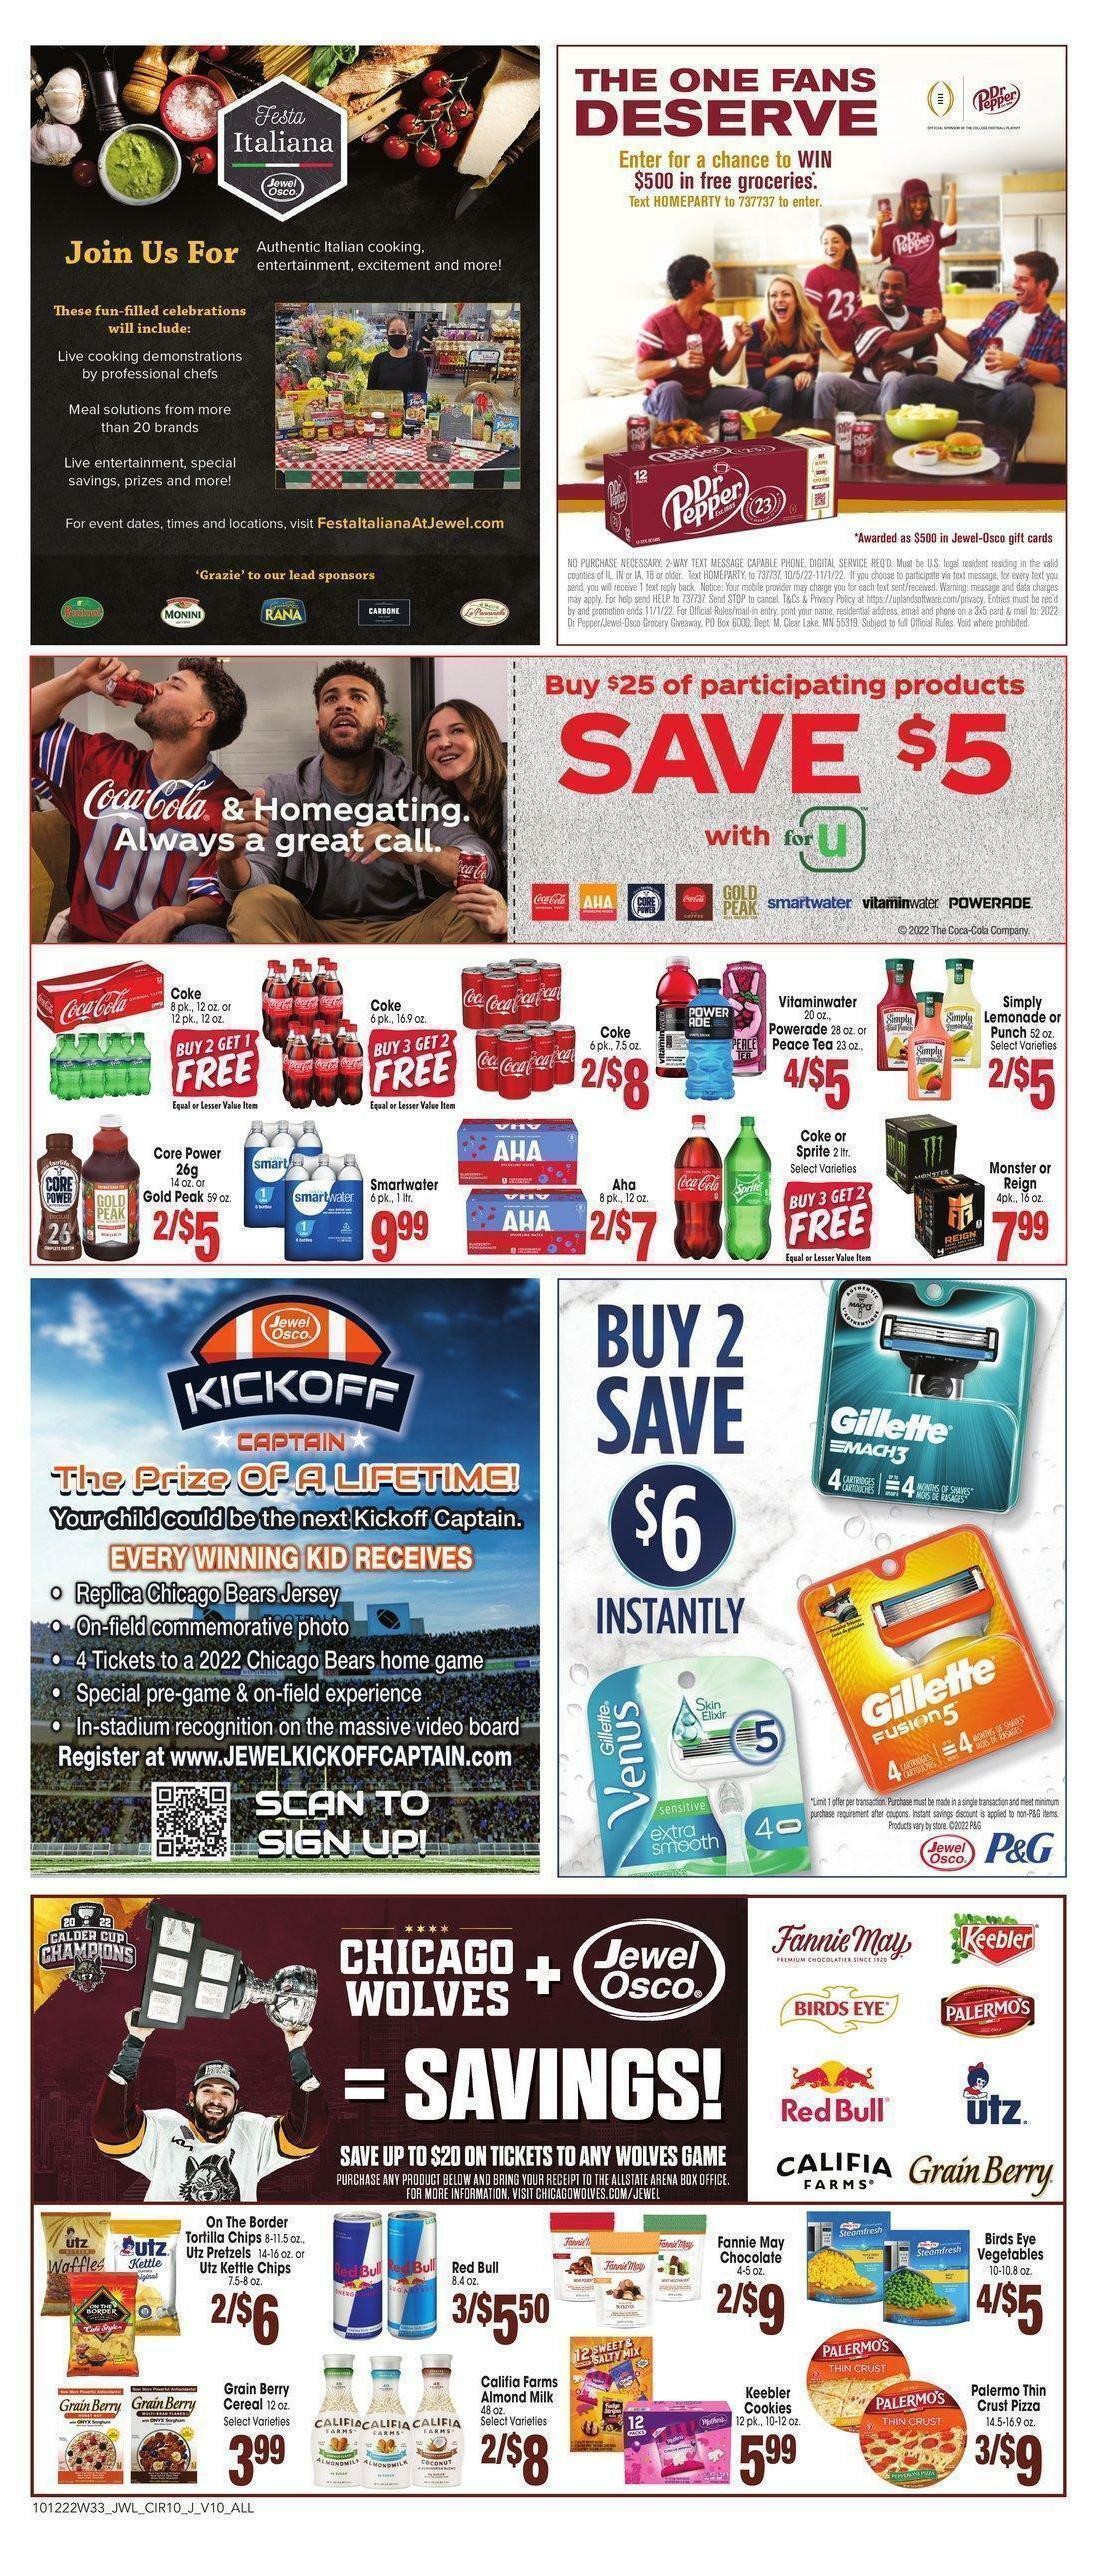 Jewel Osco Weekly Ad from October 12